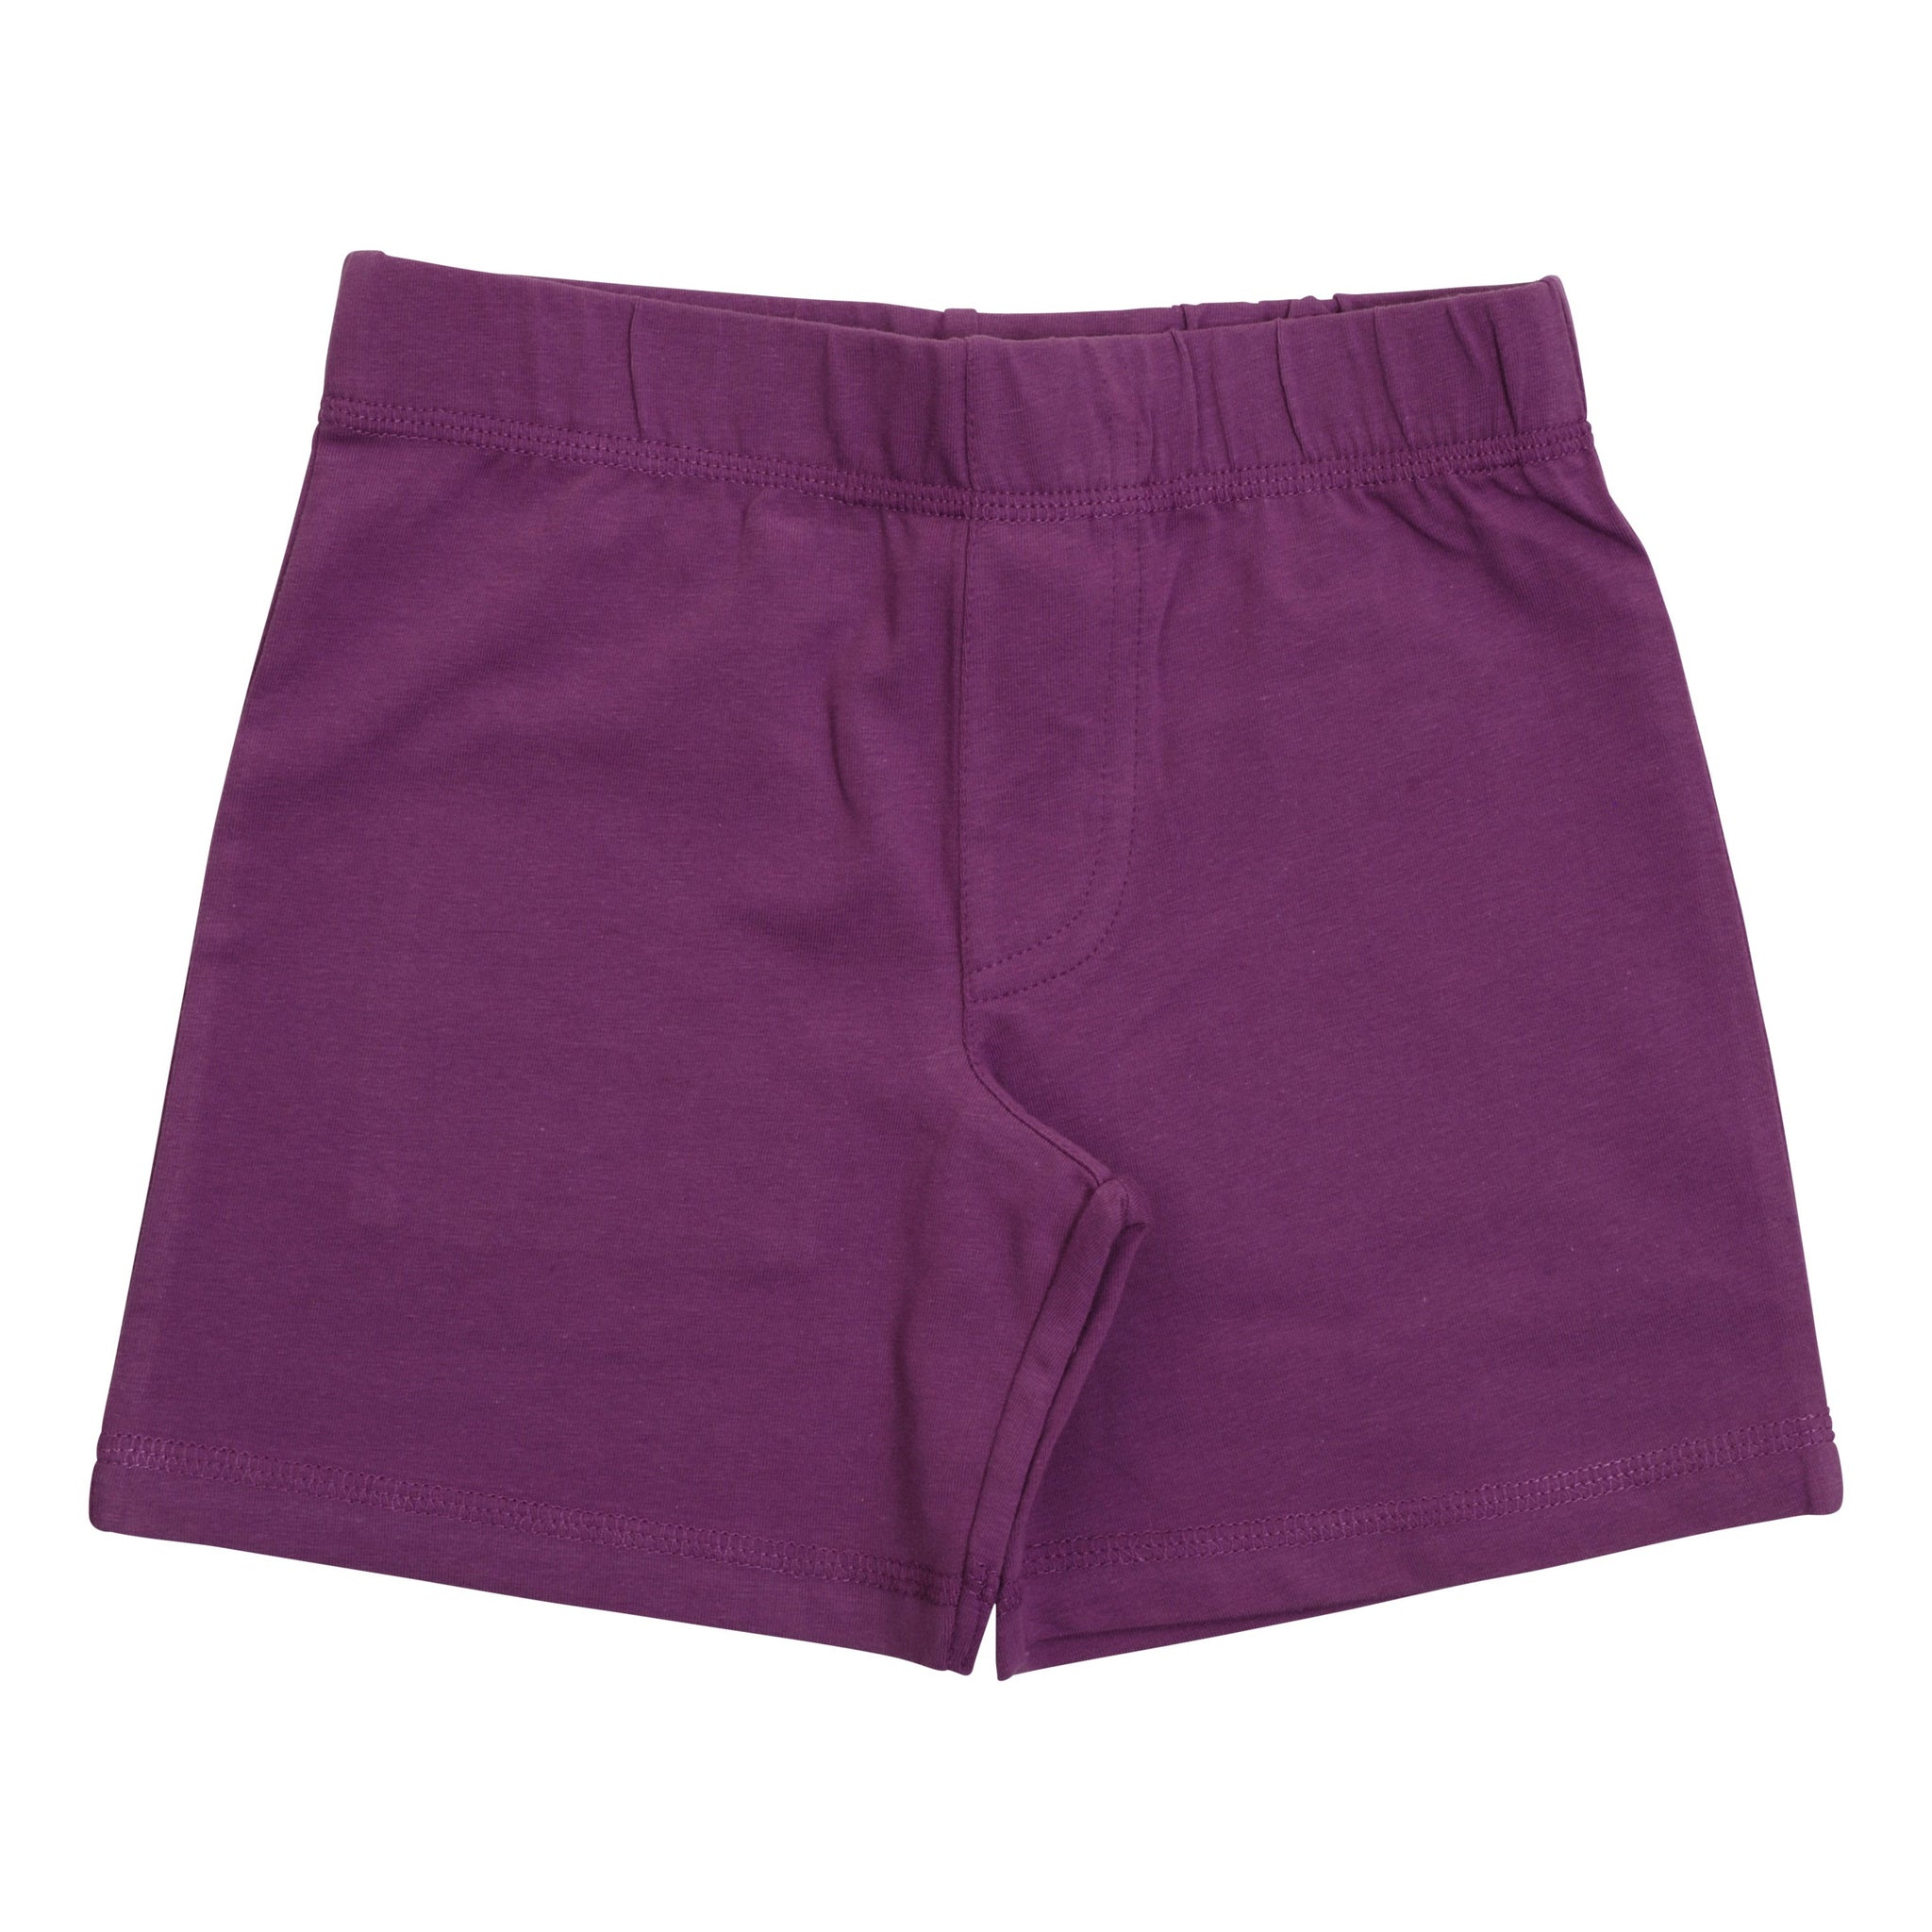 More Than A FLING - Amethyst Orchid Shorts